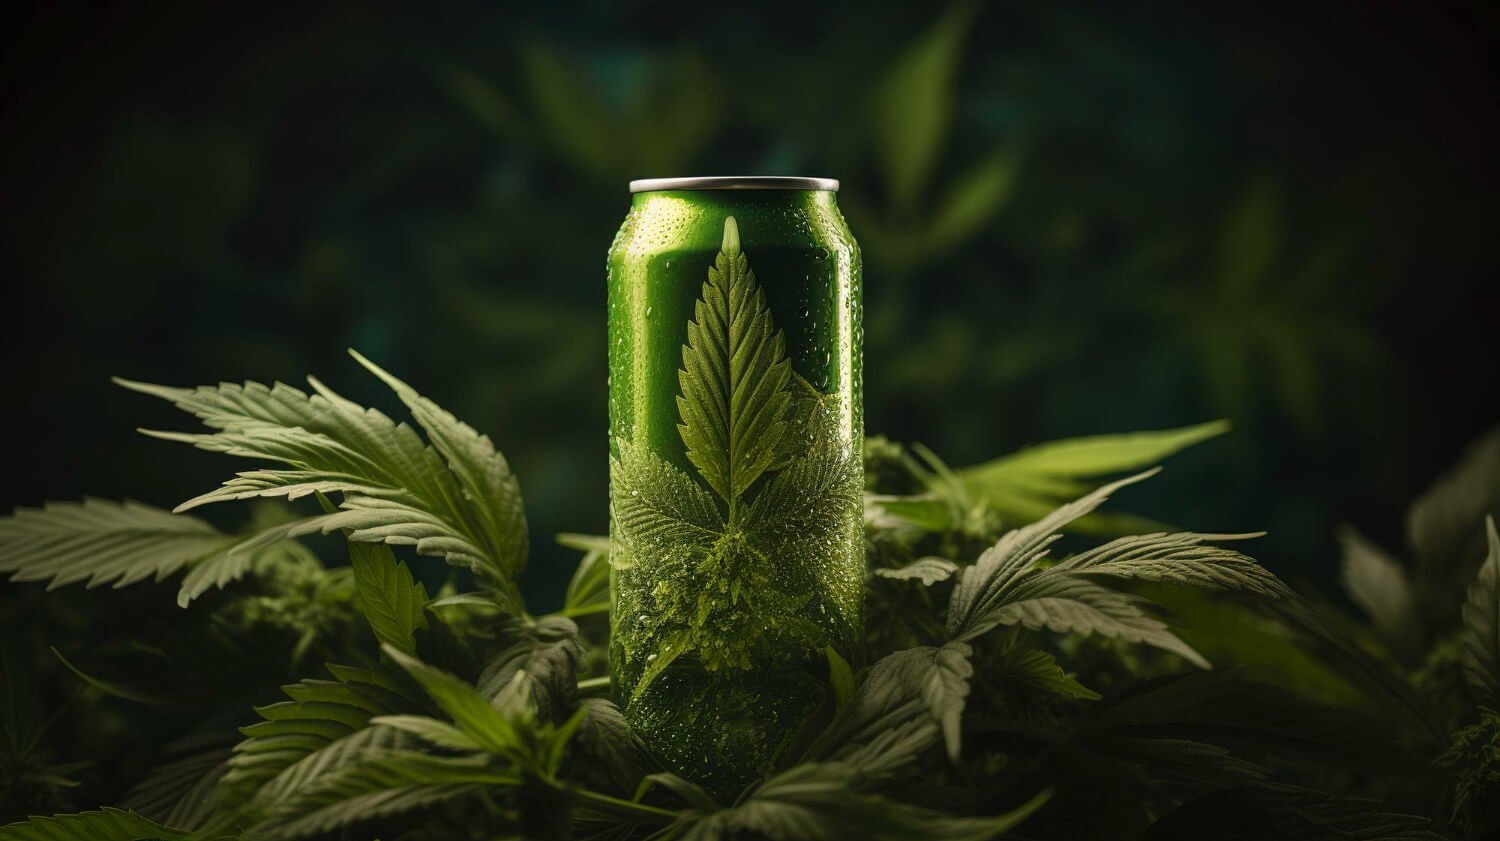 Tilray Brands acquires eight brands from Anheuser-Busch